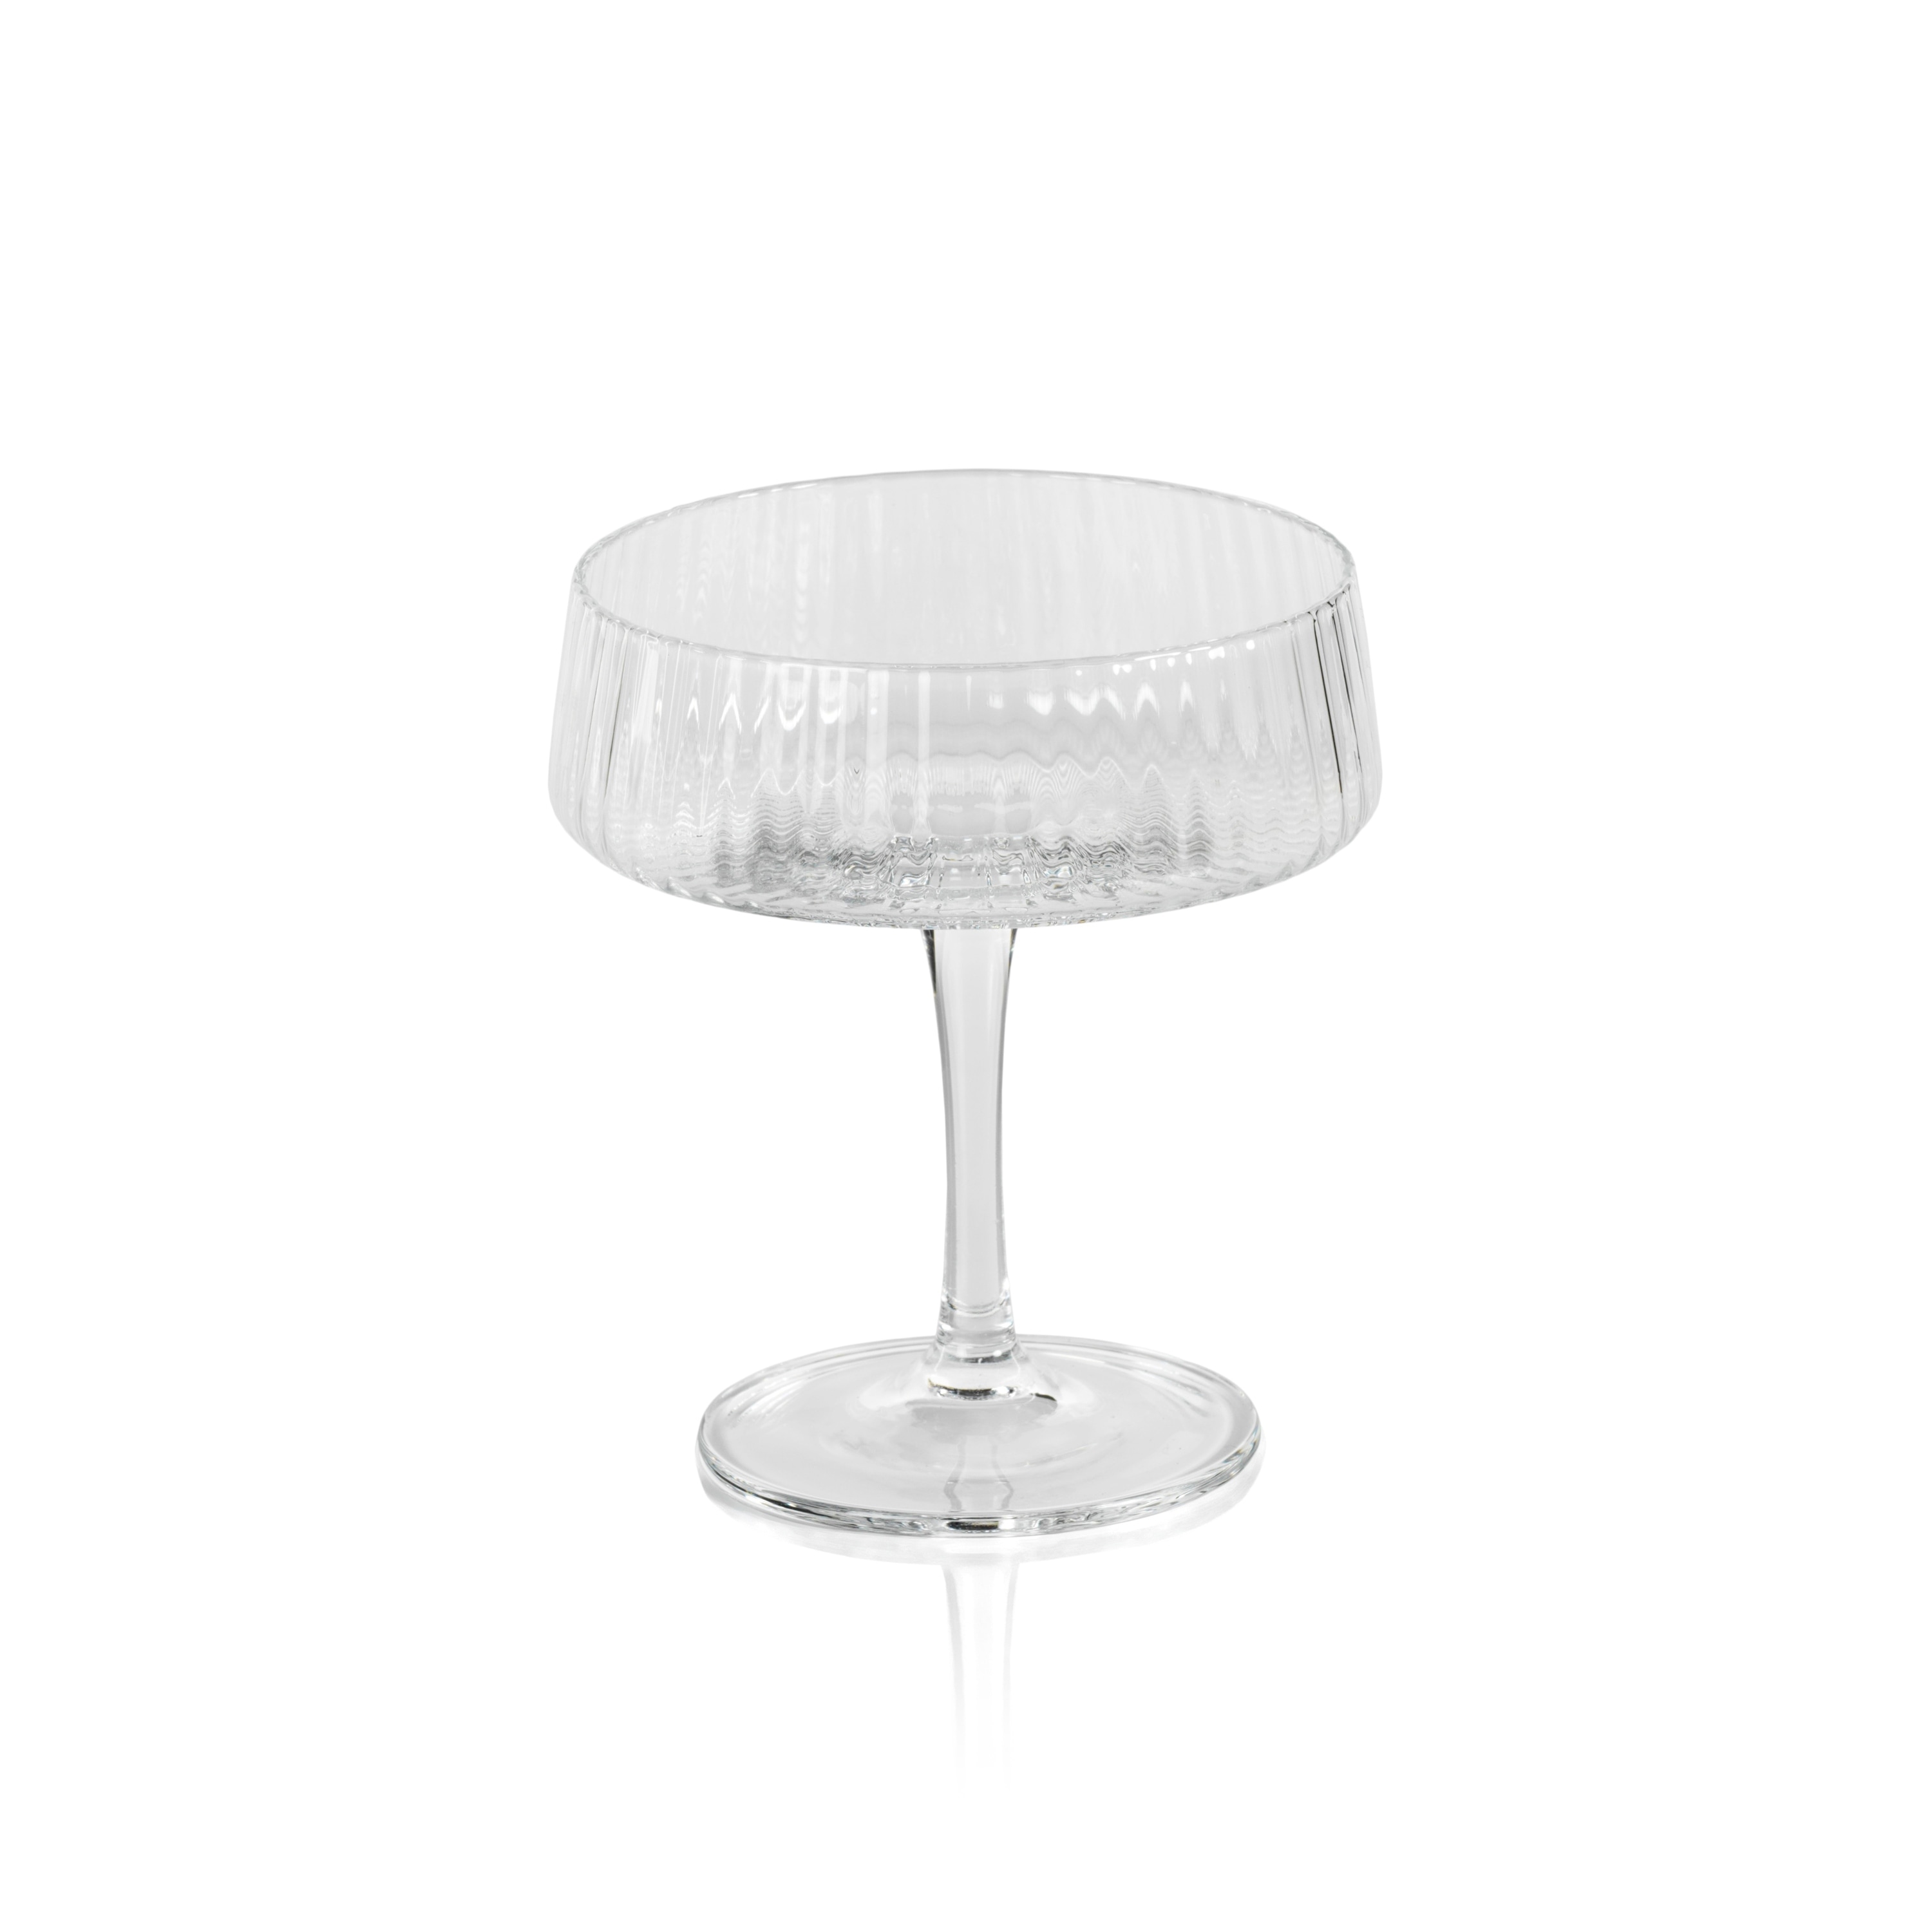 https://ak1.ostkcdn.com/images/products/is/images/direct/3d67eeede081017c018ad32393808472860c101d/Benin-Fluted-Textured-Martini-Glasses%2C-Set-of-4.jpg